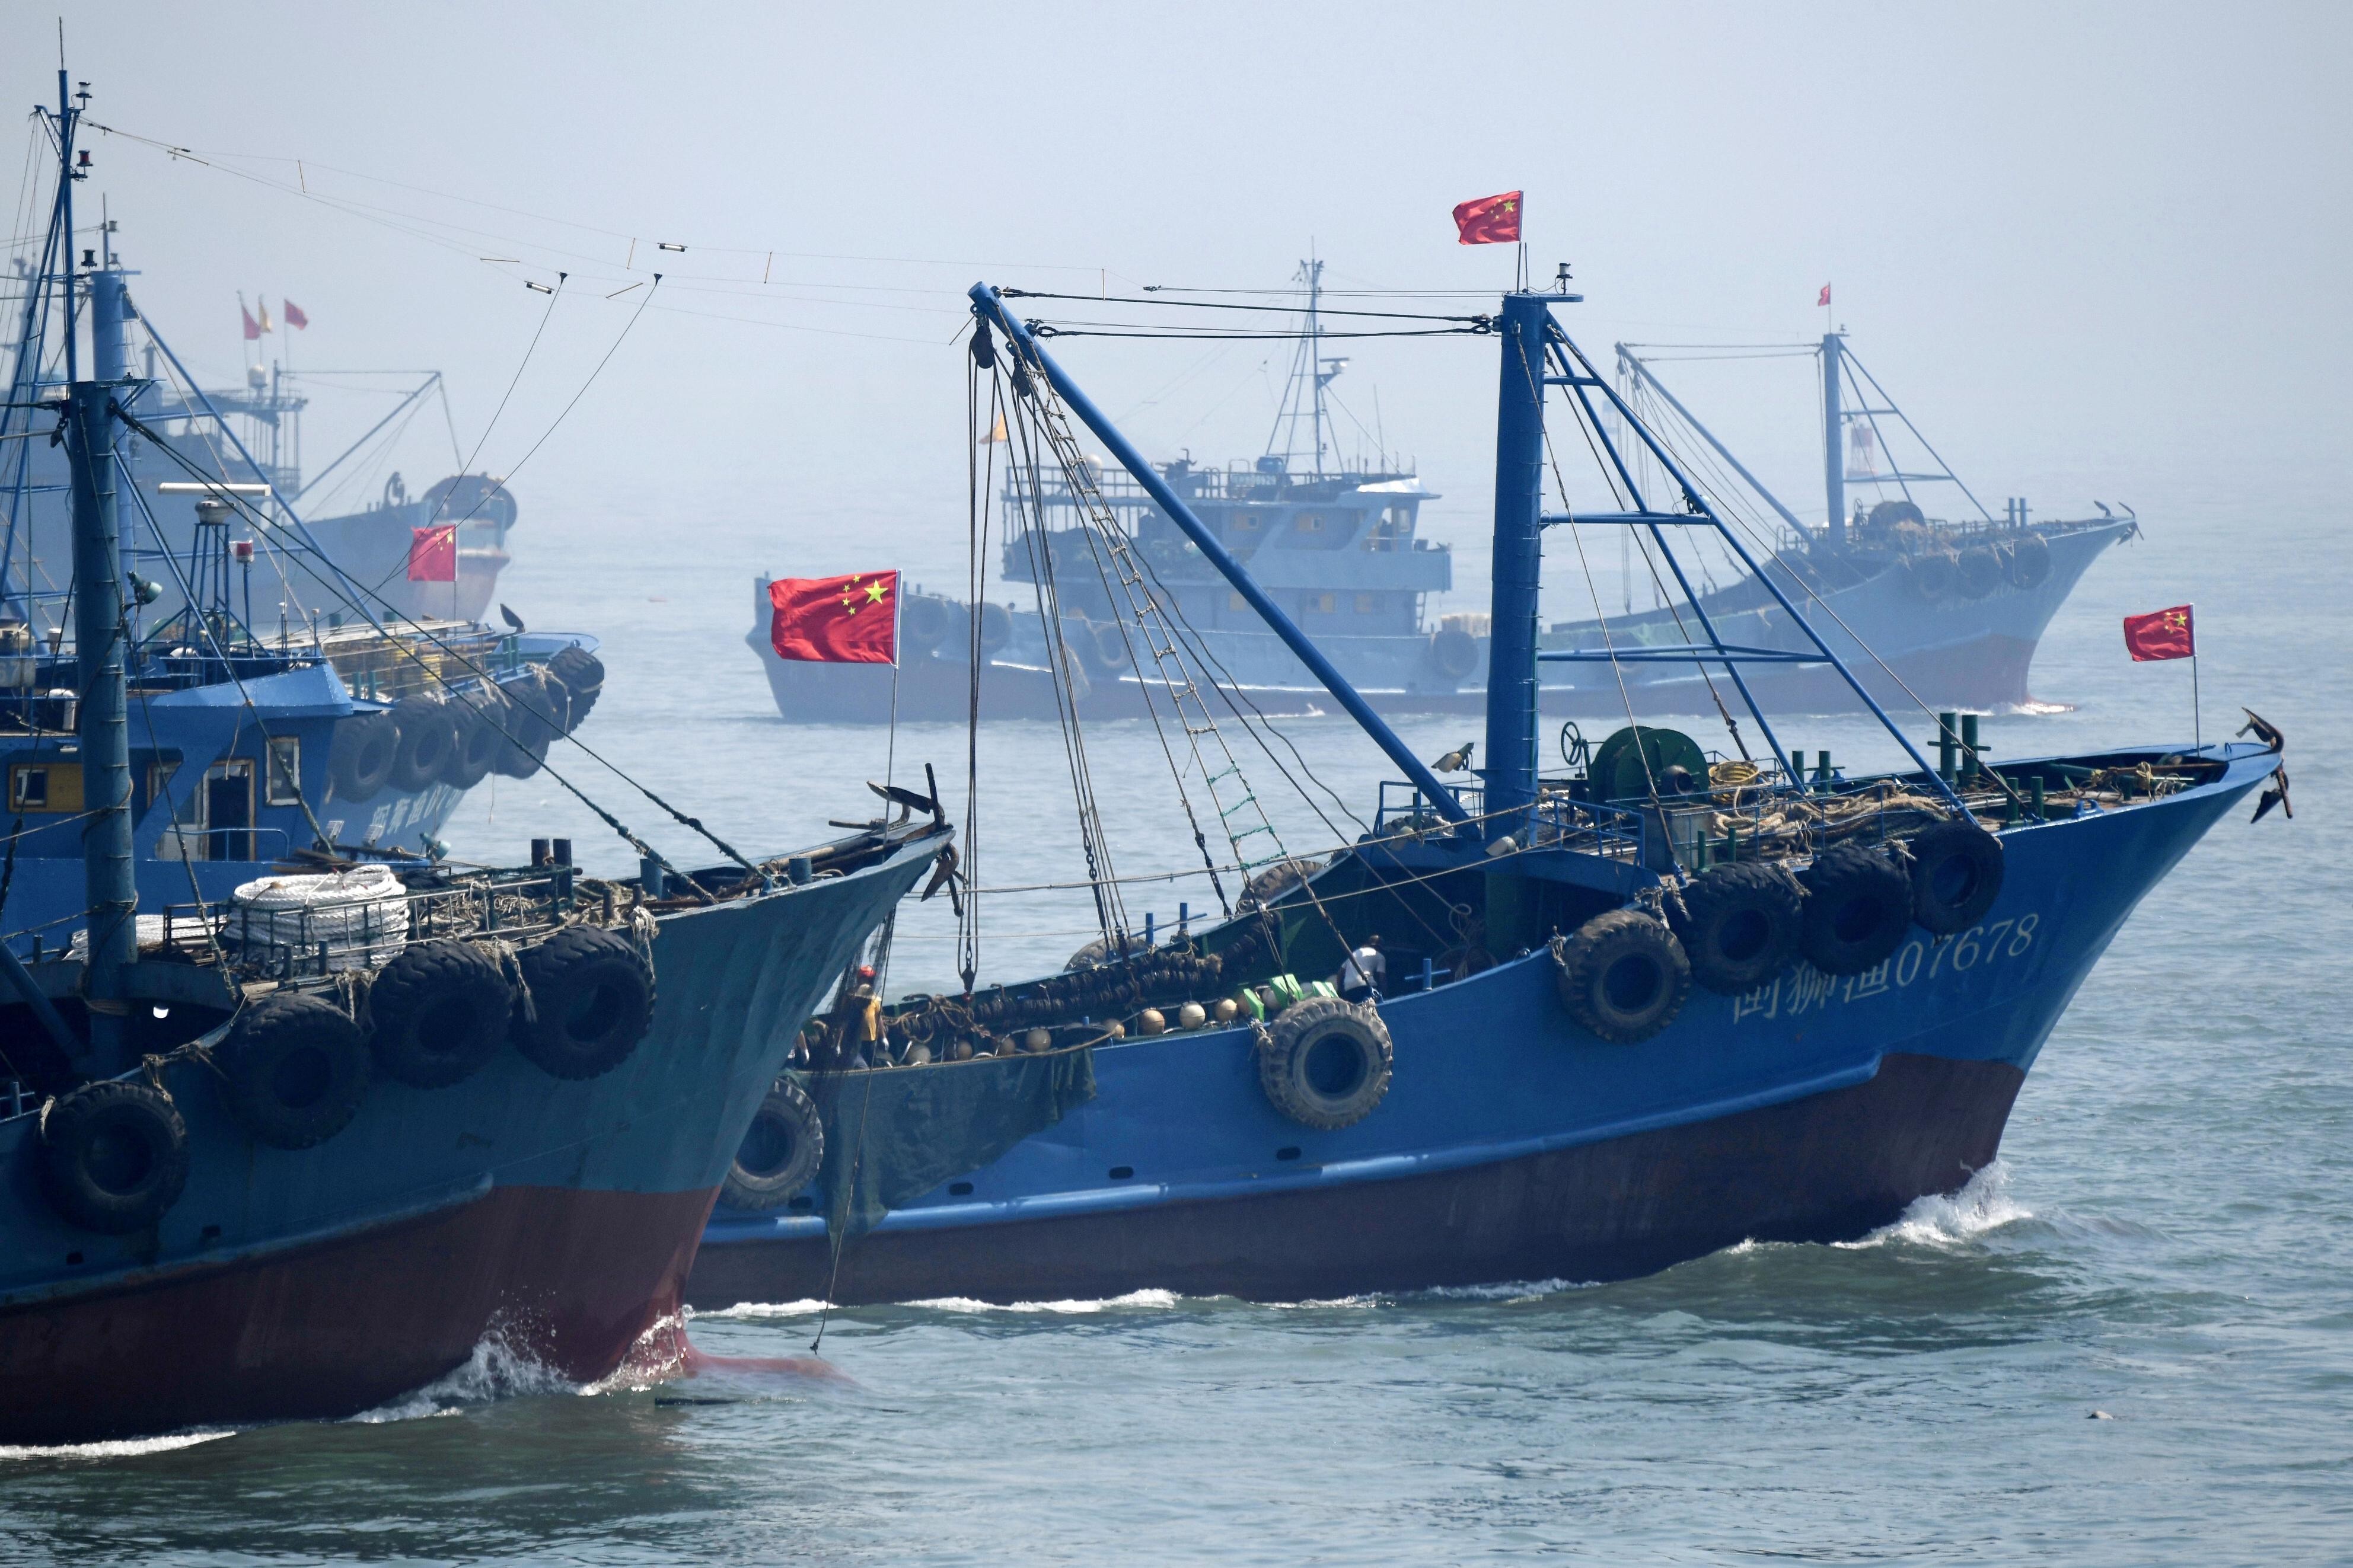 Chinese fishing vessels leaving a port in Shishi, Fujian province. China has the world’s largest industrial fishing fleet. Photo: Kyodo